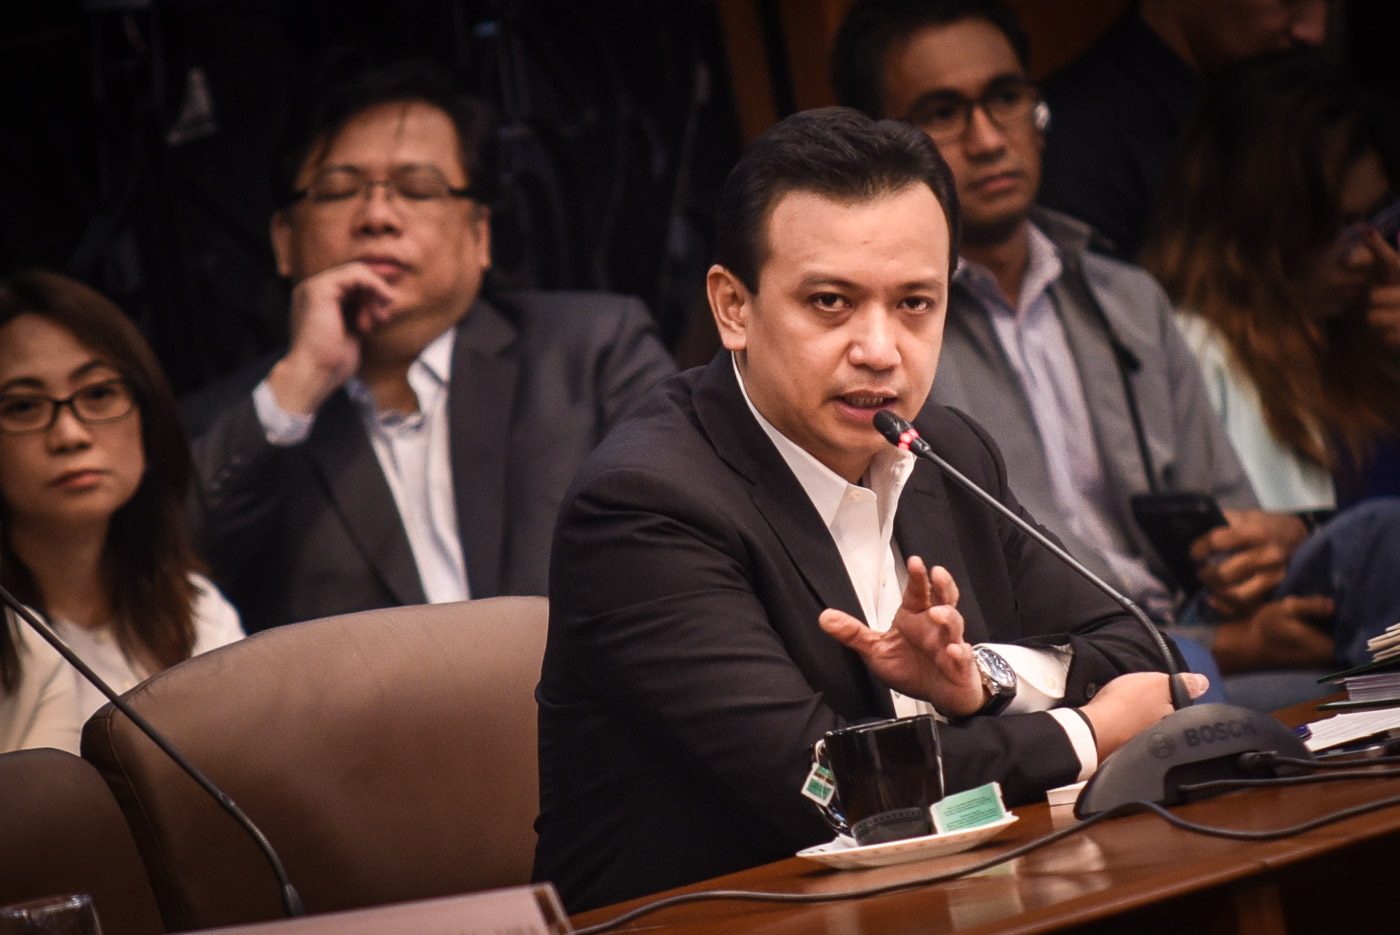 Inciting to sedition: Charges filed vs Trillanes over anti-Duterte speech